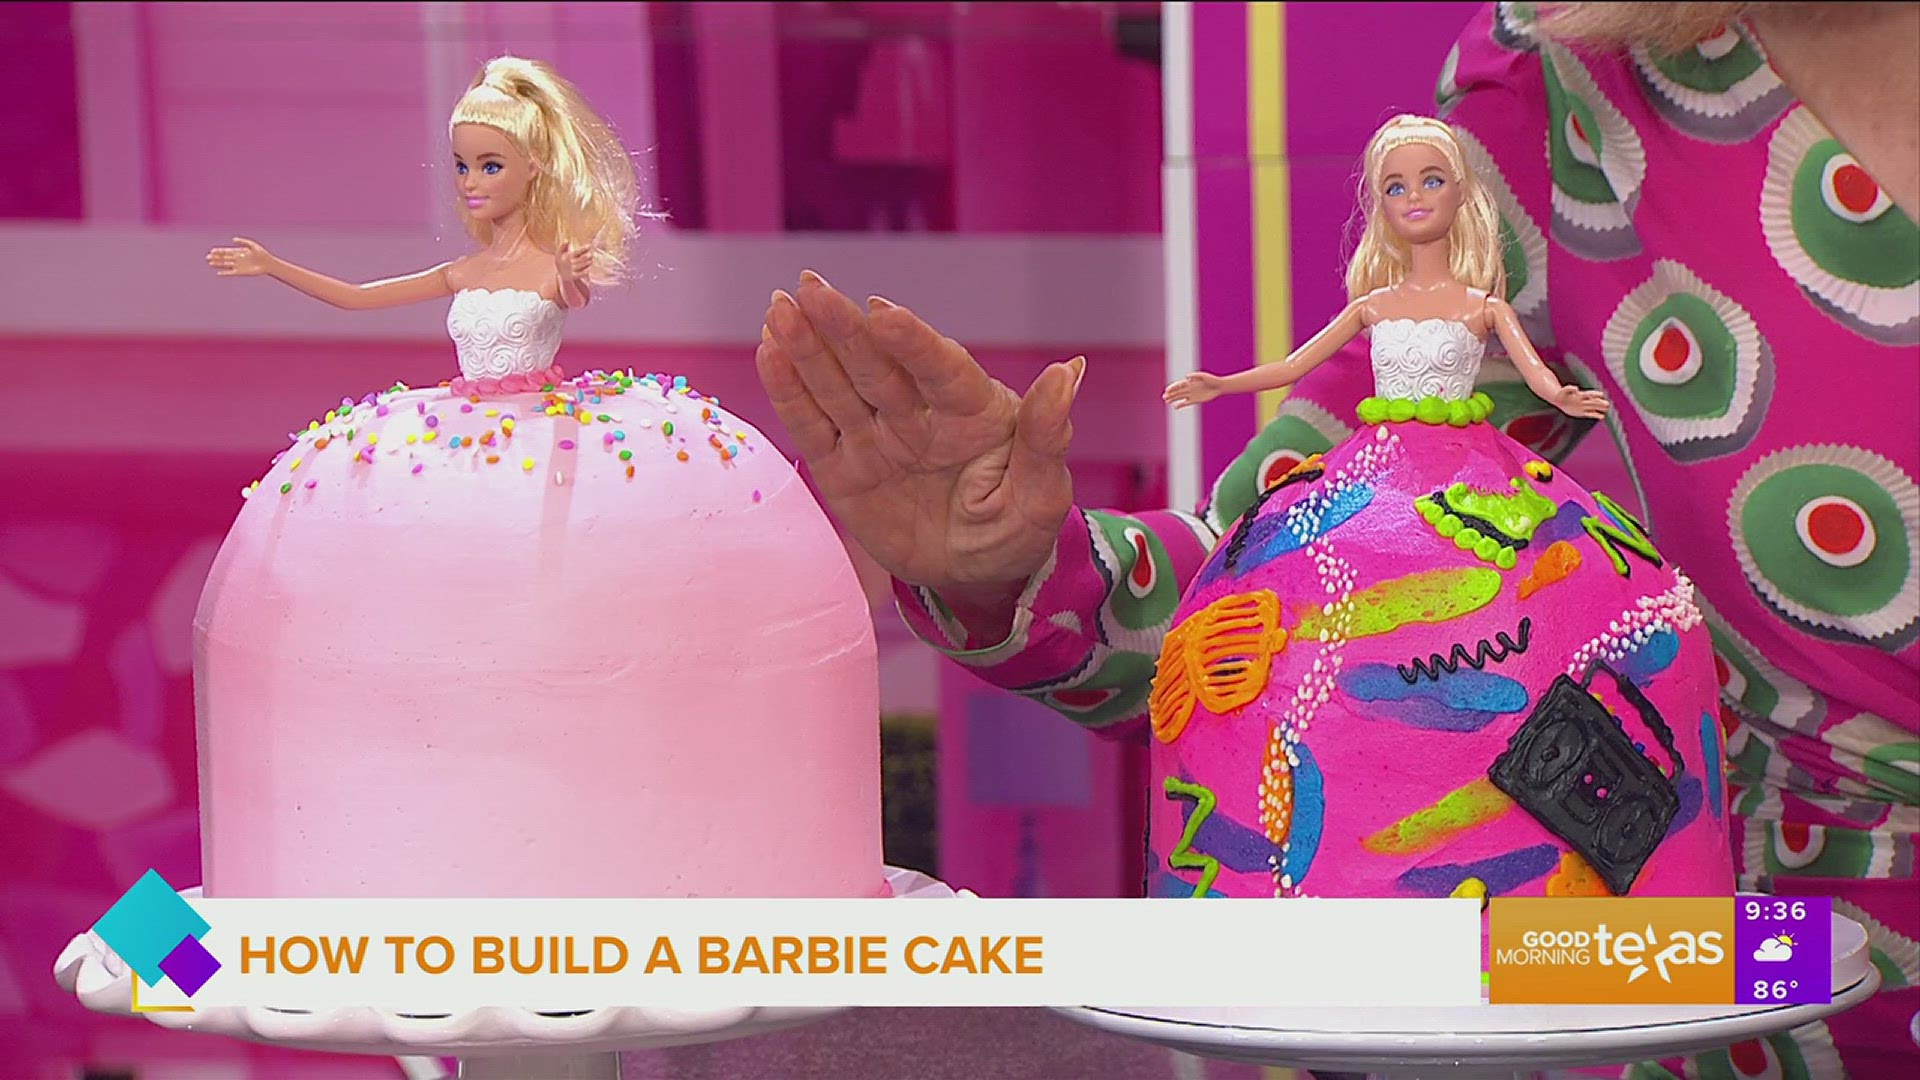 SusieCakes owner Susan Sarich stops by to show Jane & Paige how to form a Barbie cake. Go to susiecakes.com/barbie-cake for more information.